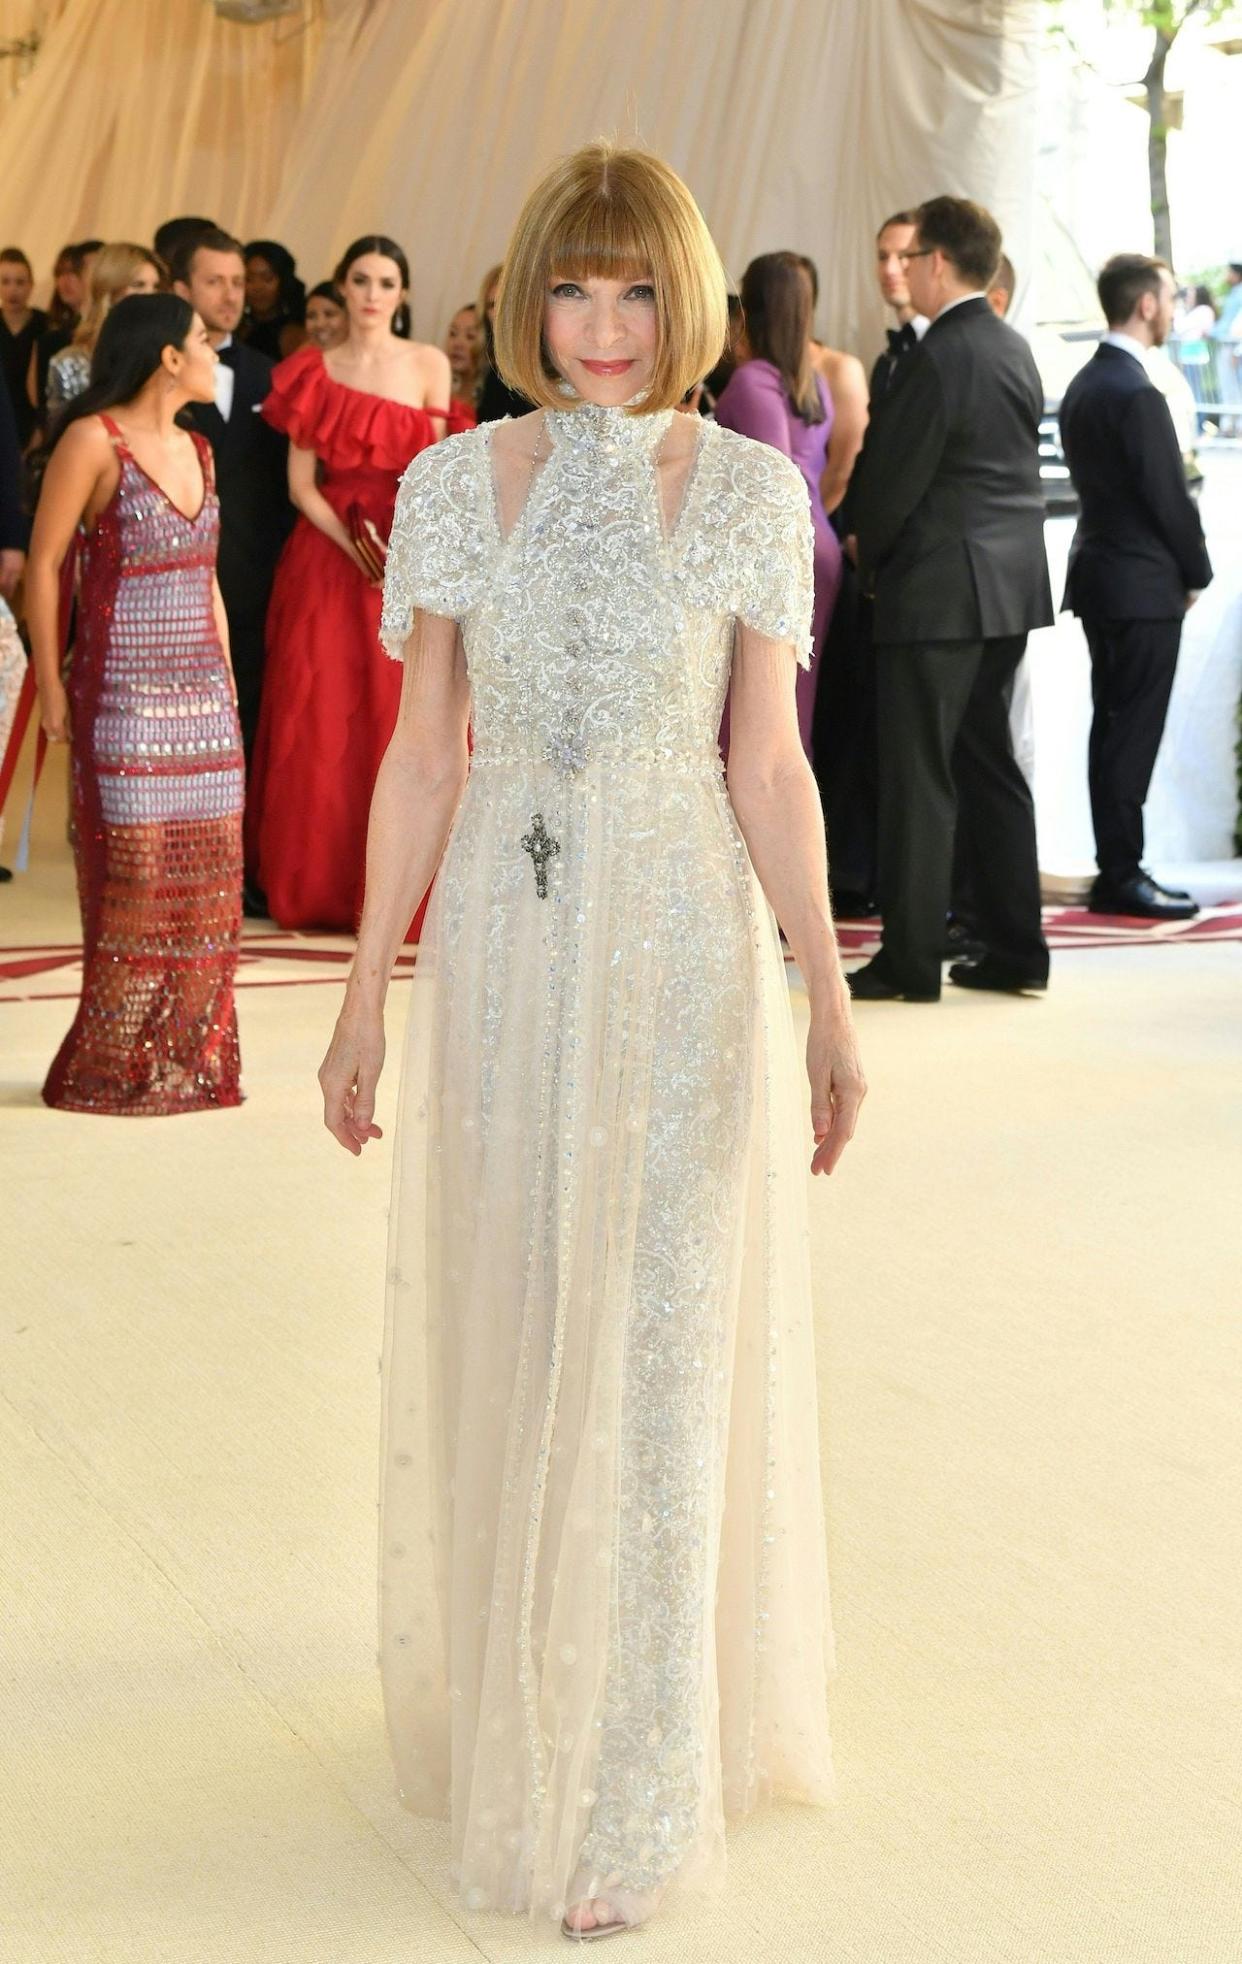 Anna Wintour at the 2018 Met Gala.